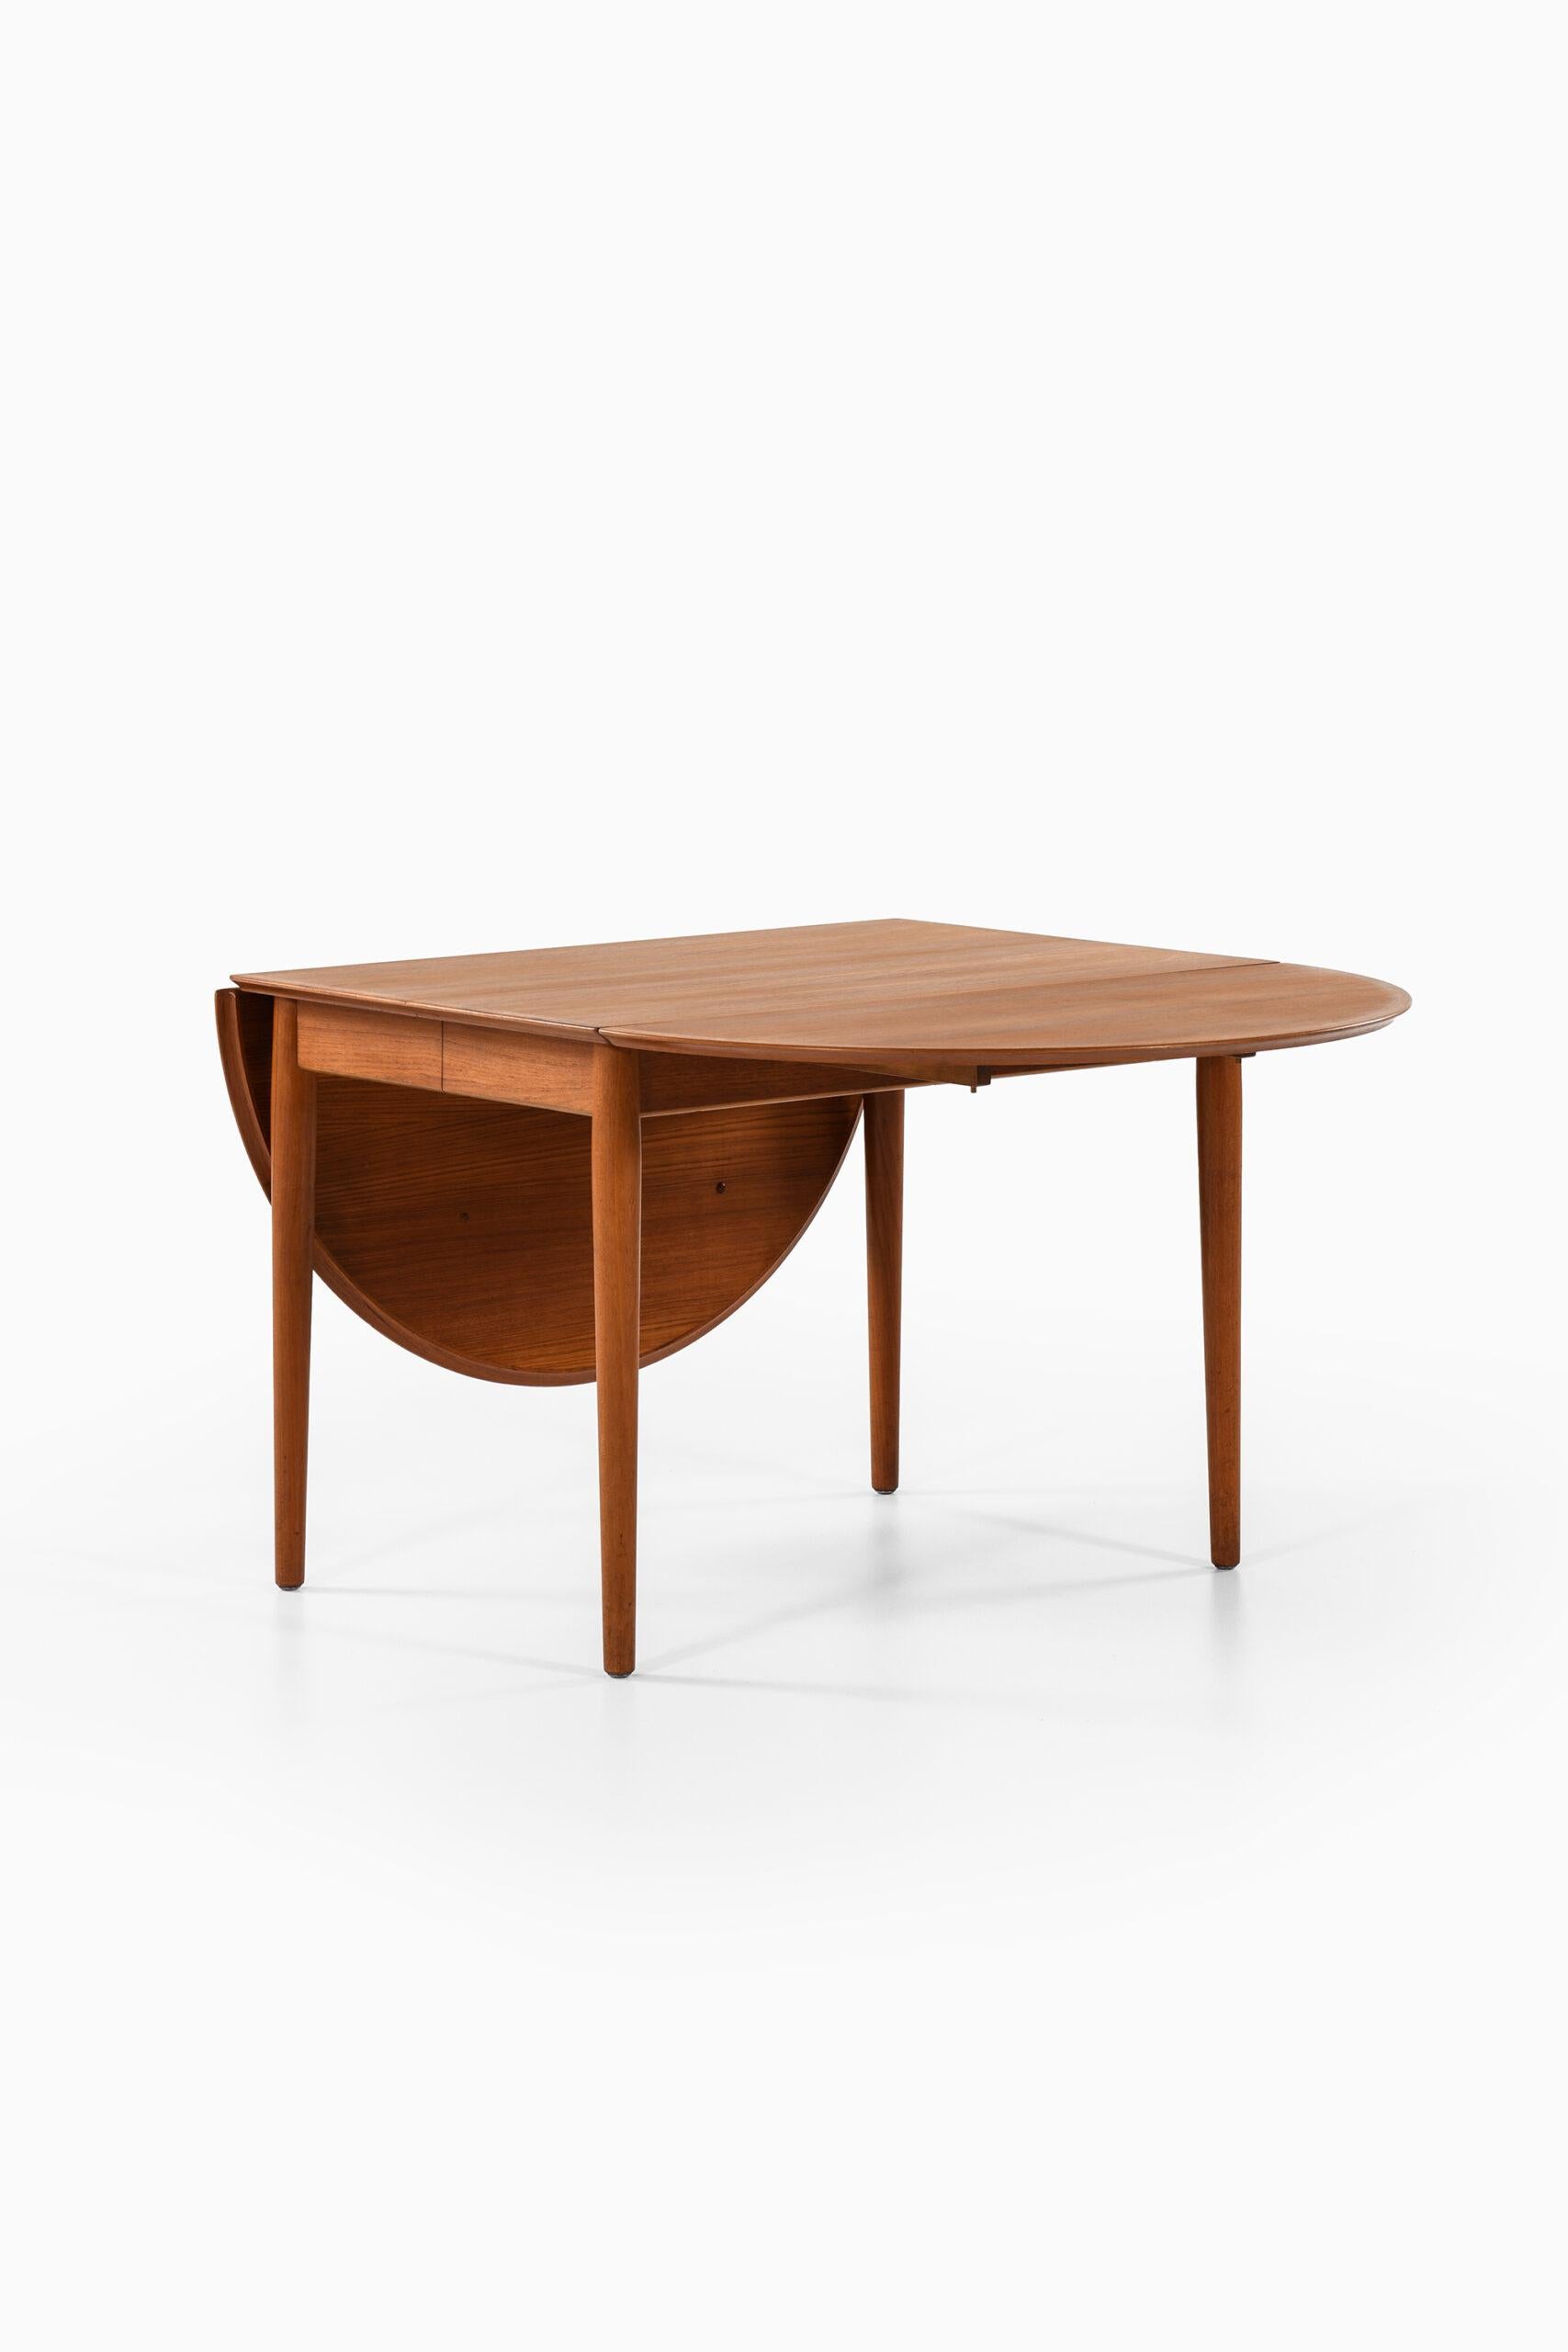 Mid-20th Century Arne Vodder Dining Table Model 227 Produced by Sibast in Denmark For Sale